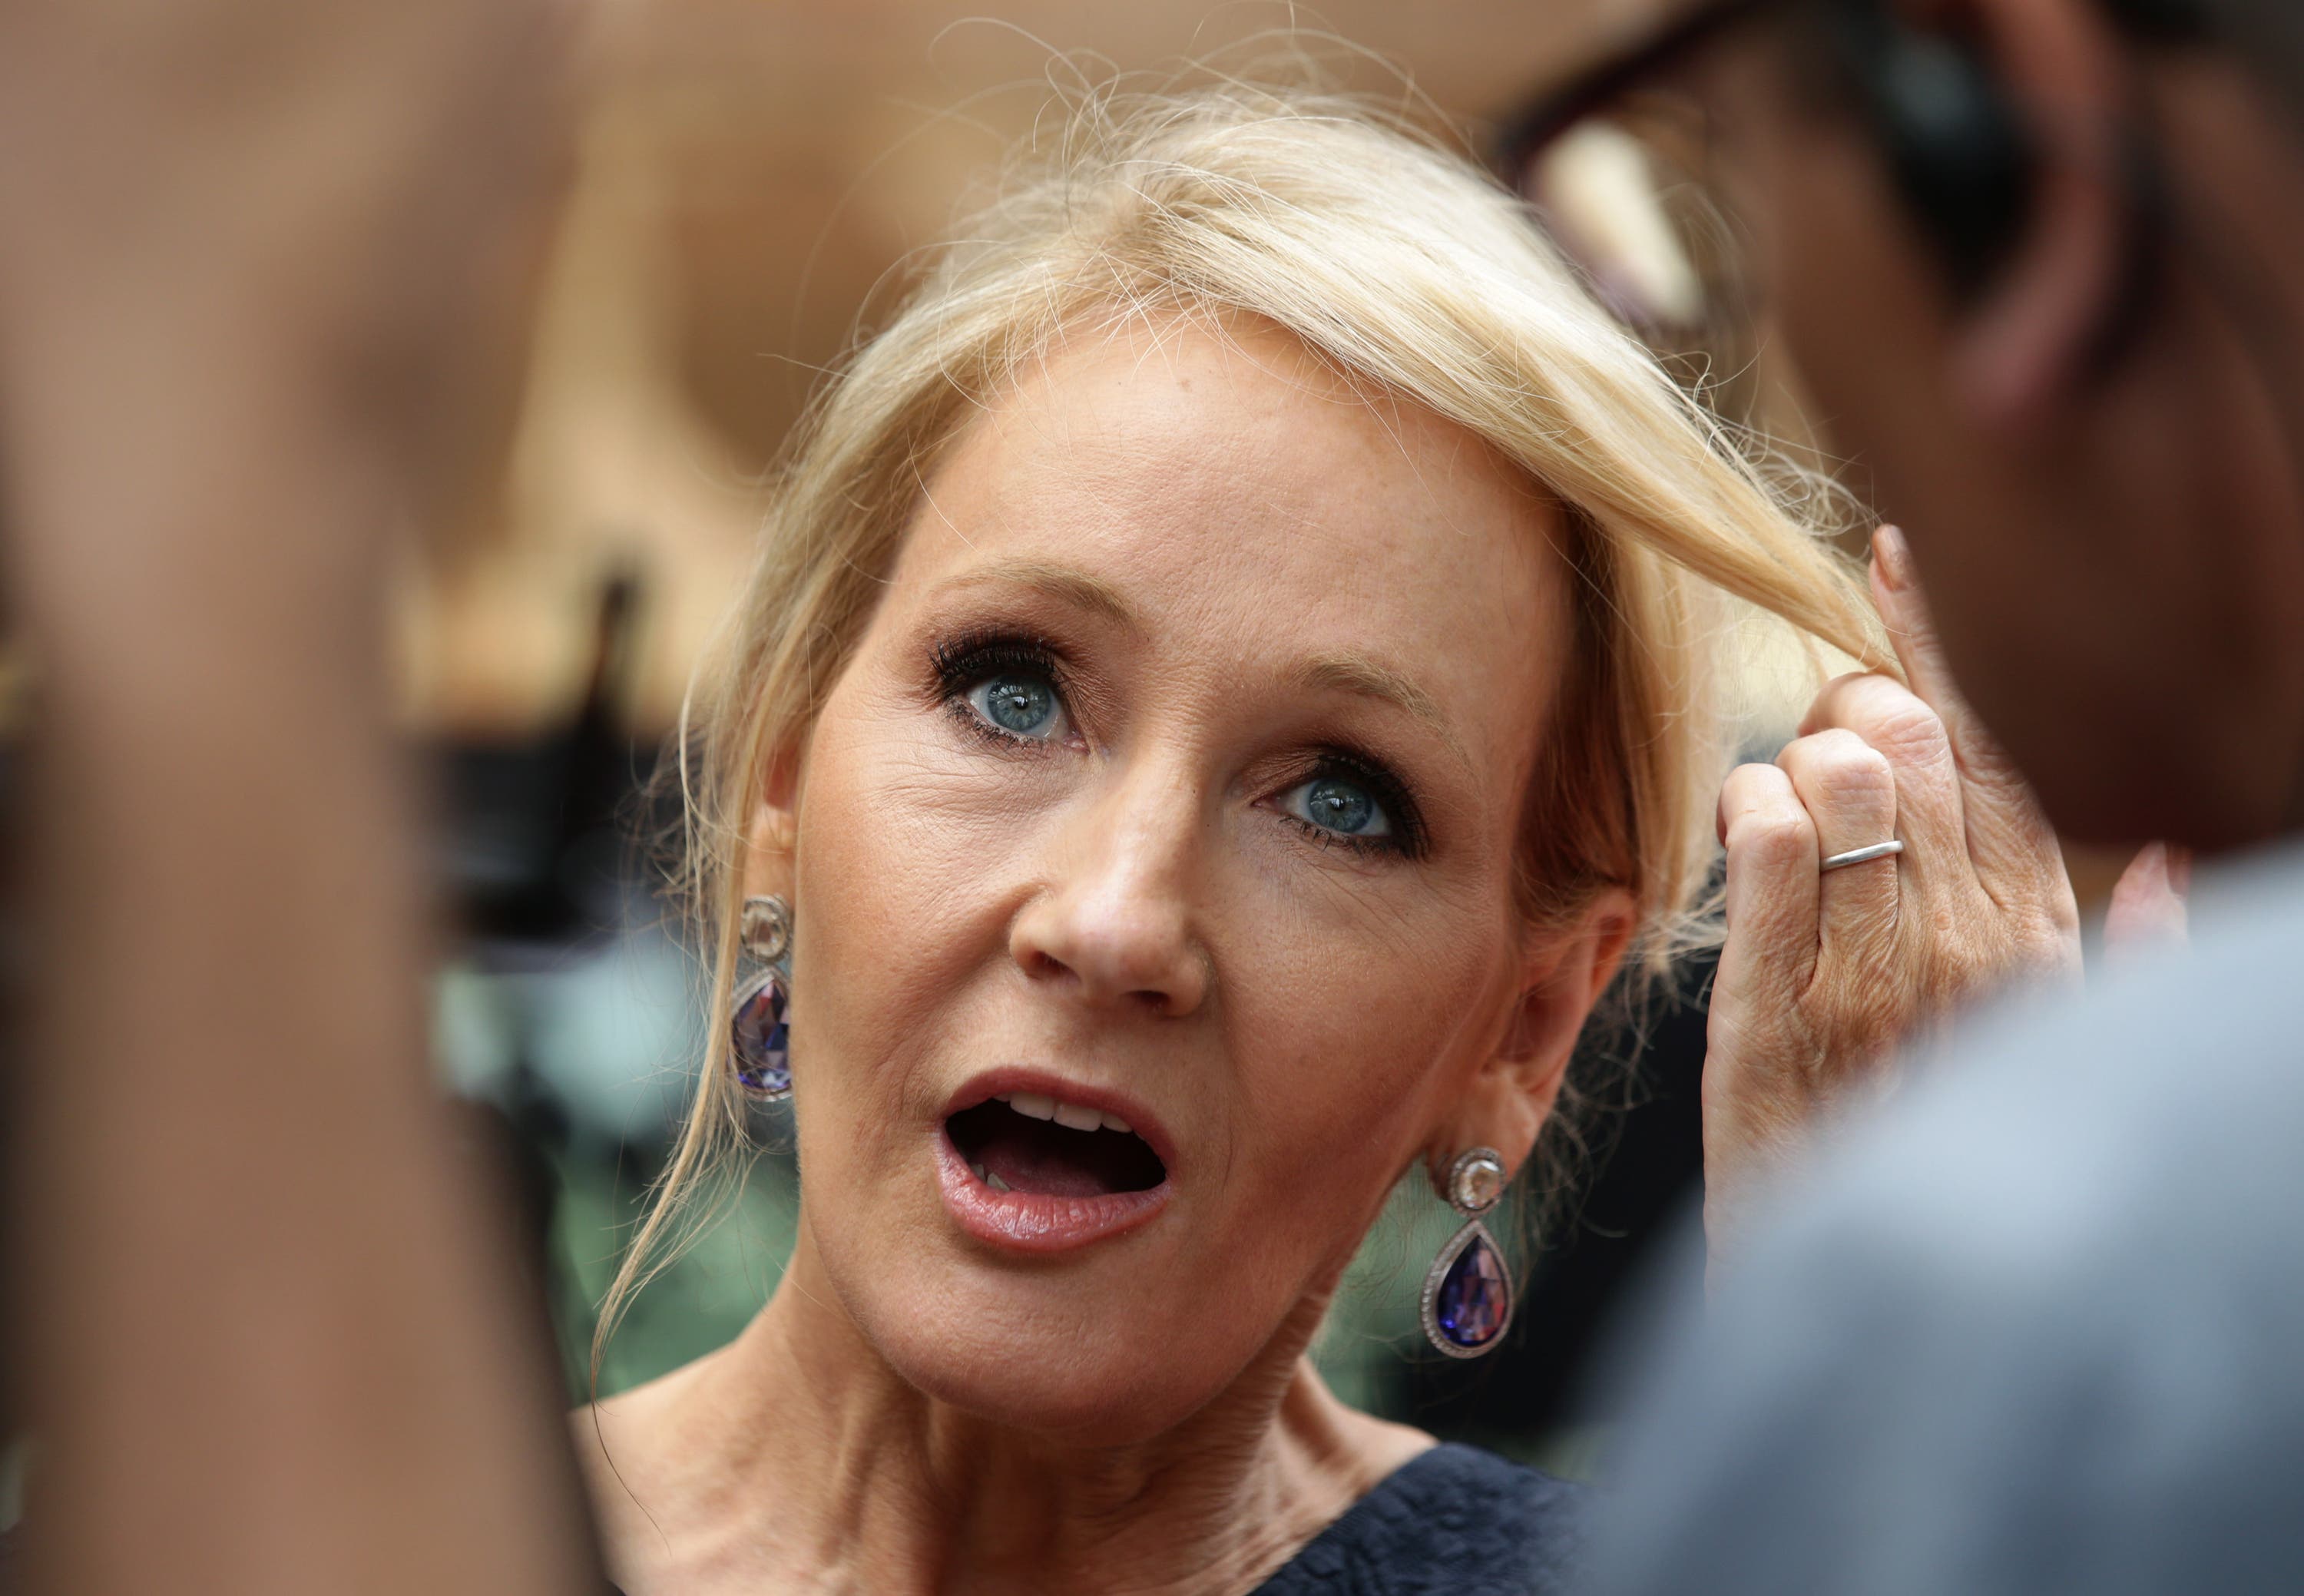 JK Rowling has been a prominent critic of the extension of hate crime laws.